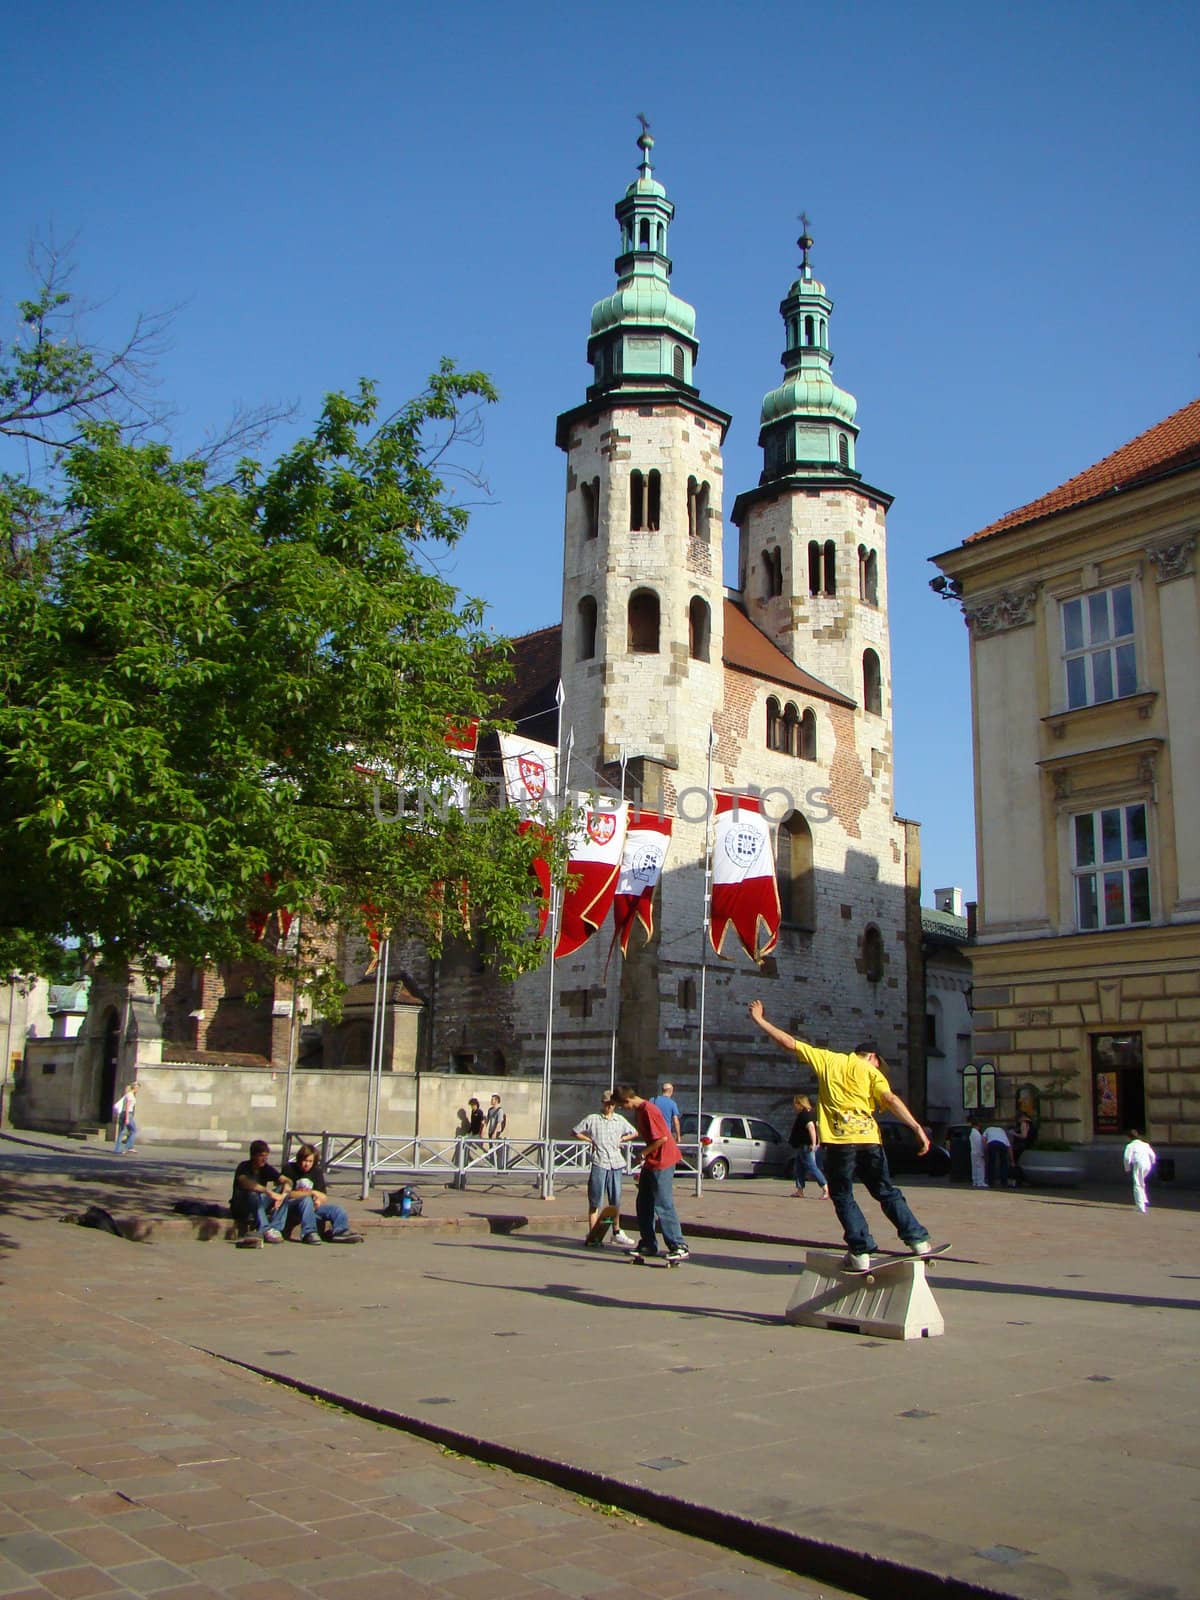 
Romanesque st. Andrew church in Cracow capital of Malopolska region in south Poland. 2008